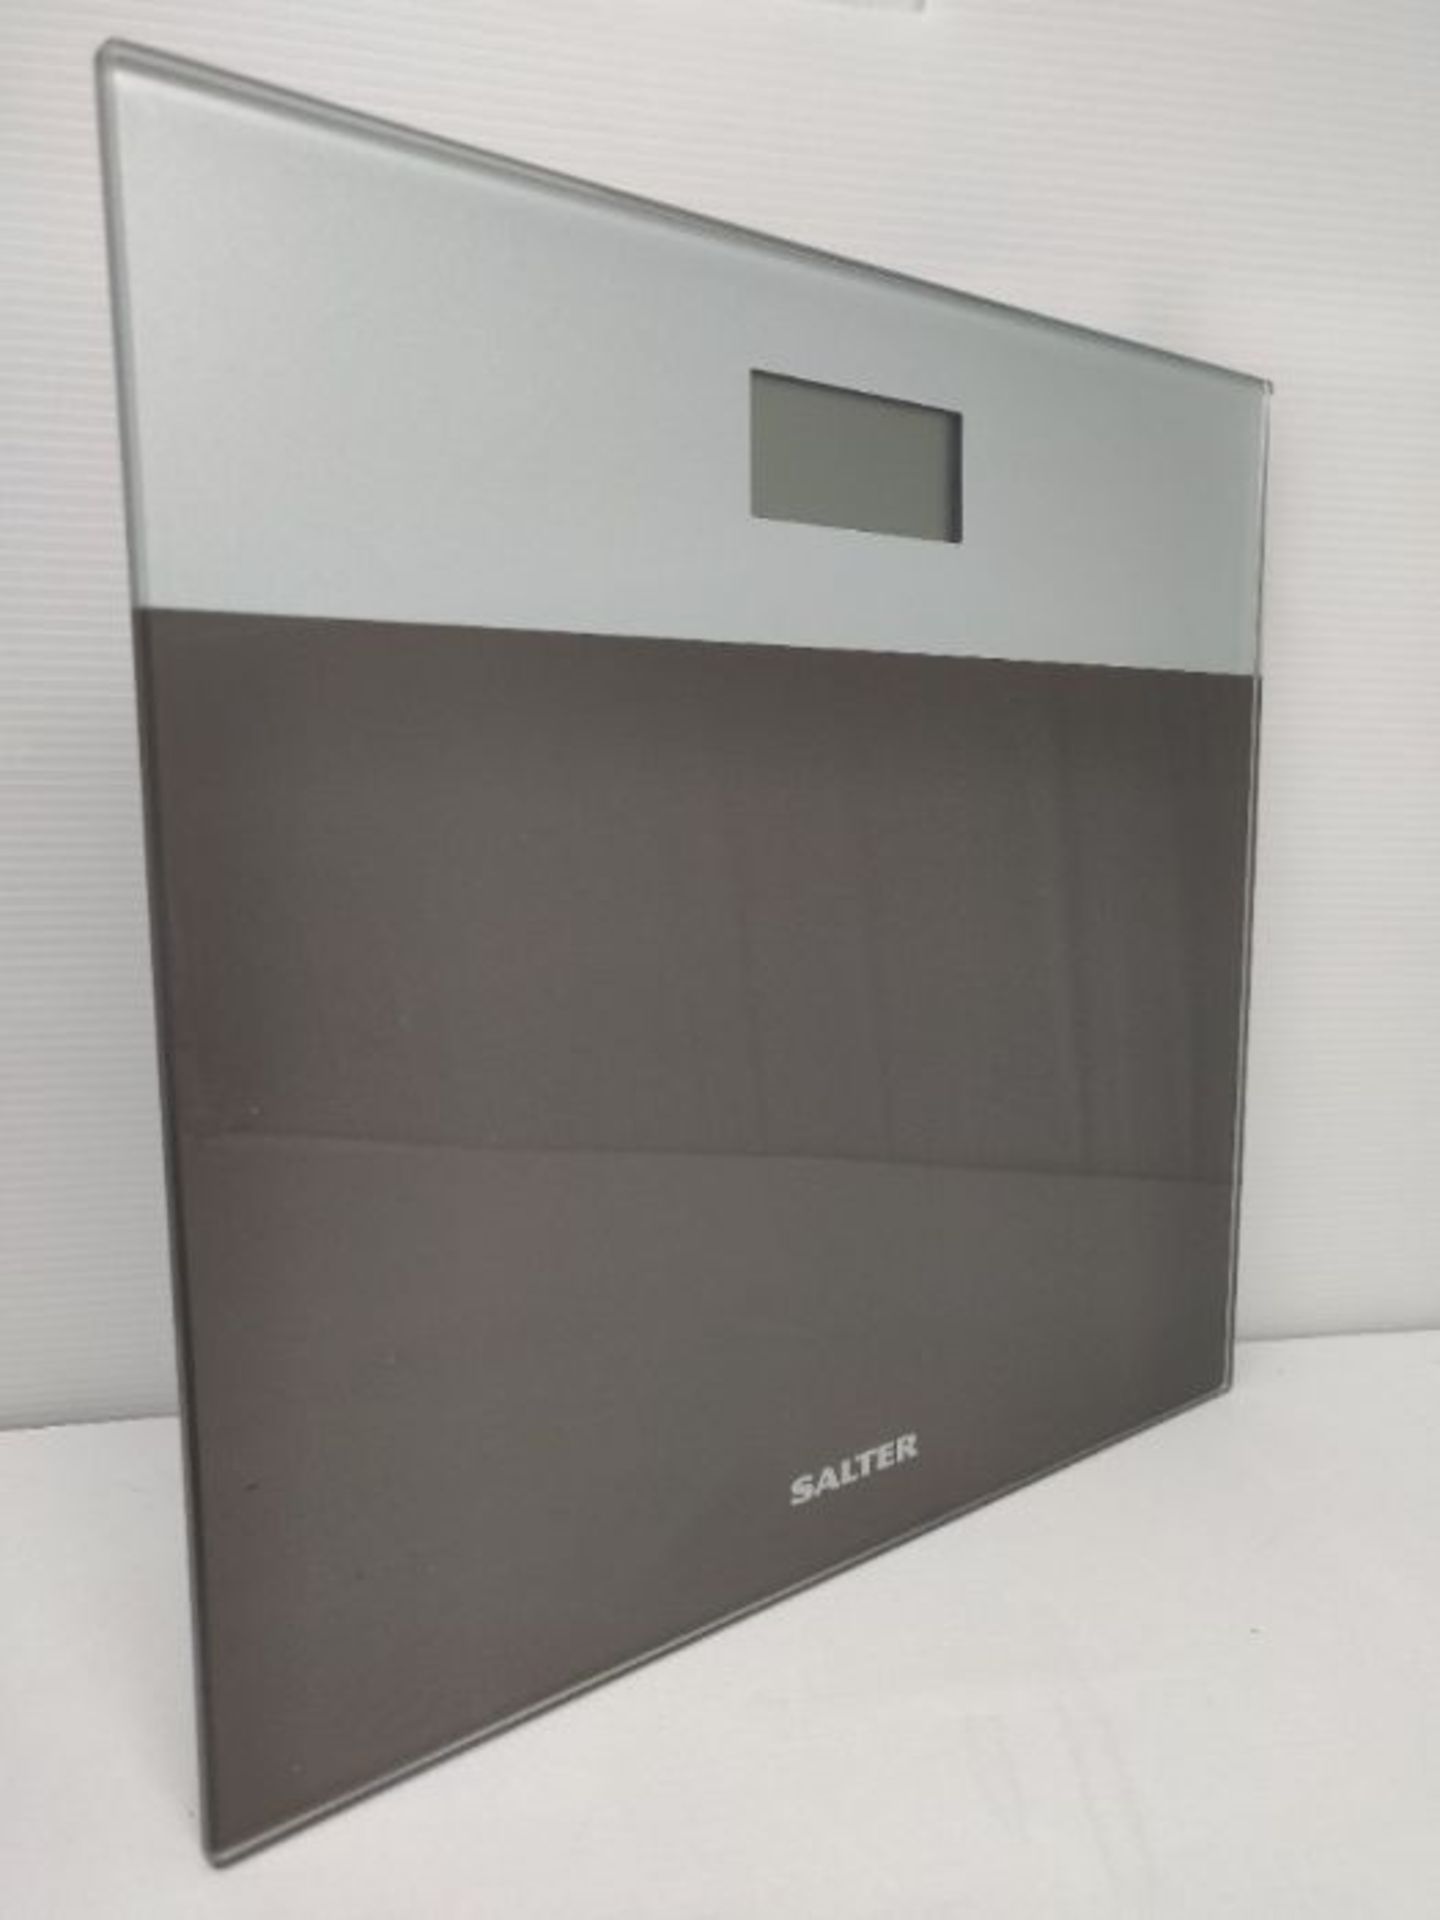 Salter Digital Body Weight Bathroom Scale (Ultra Slim, Easy Read Tempered Glass, Step- - Image 2 of 2